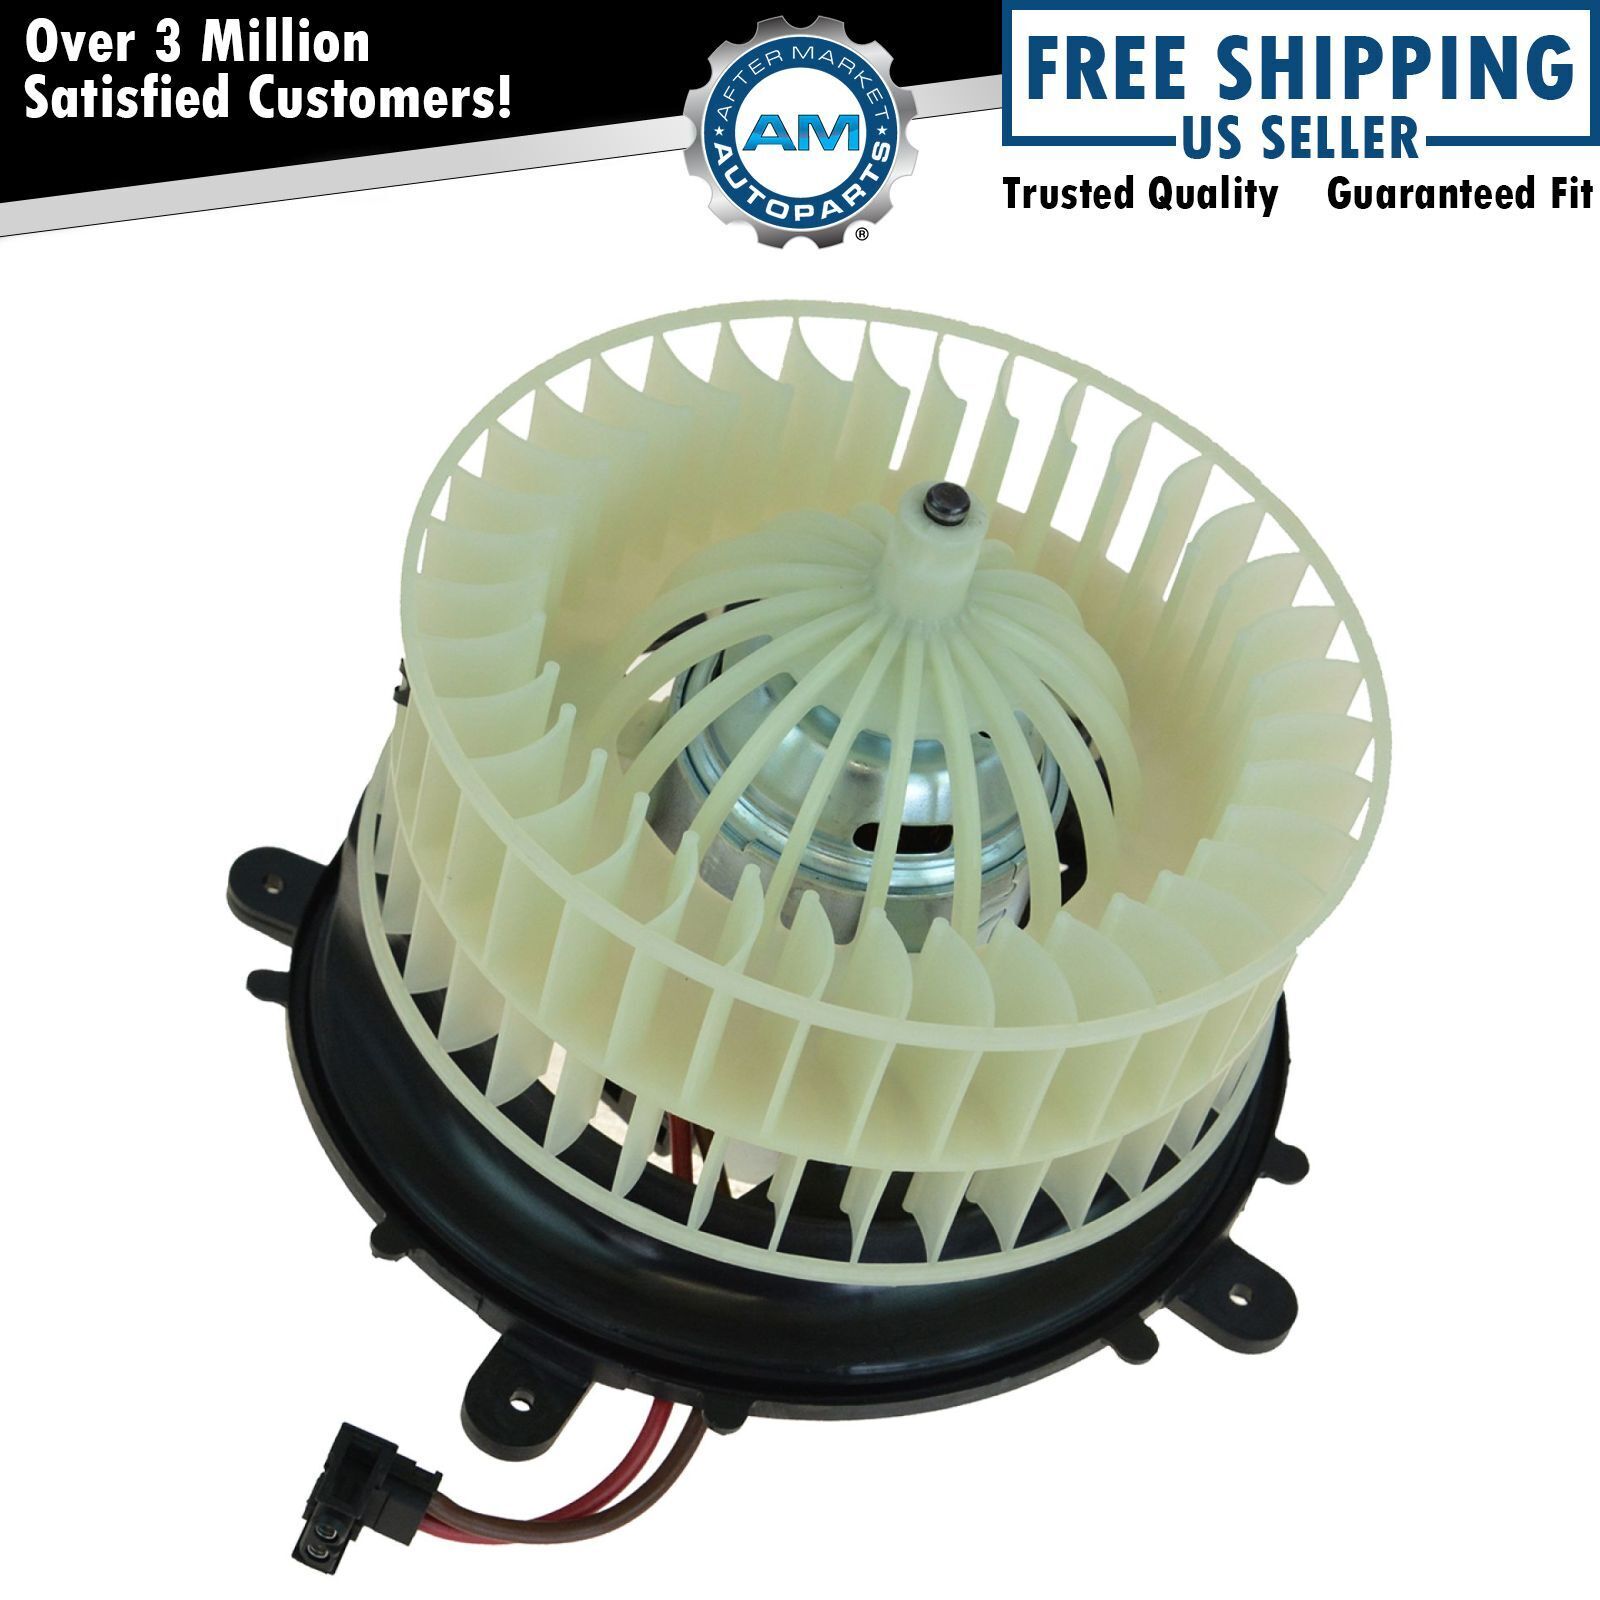 Heater Blower Motor w/ Fan Cage for CL500 CL55 AMG CL600 S350 S430 S500 S600